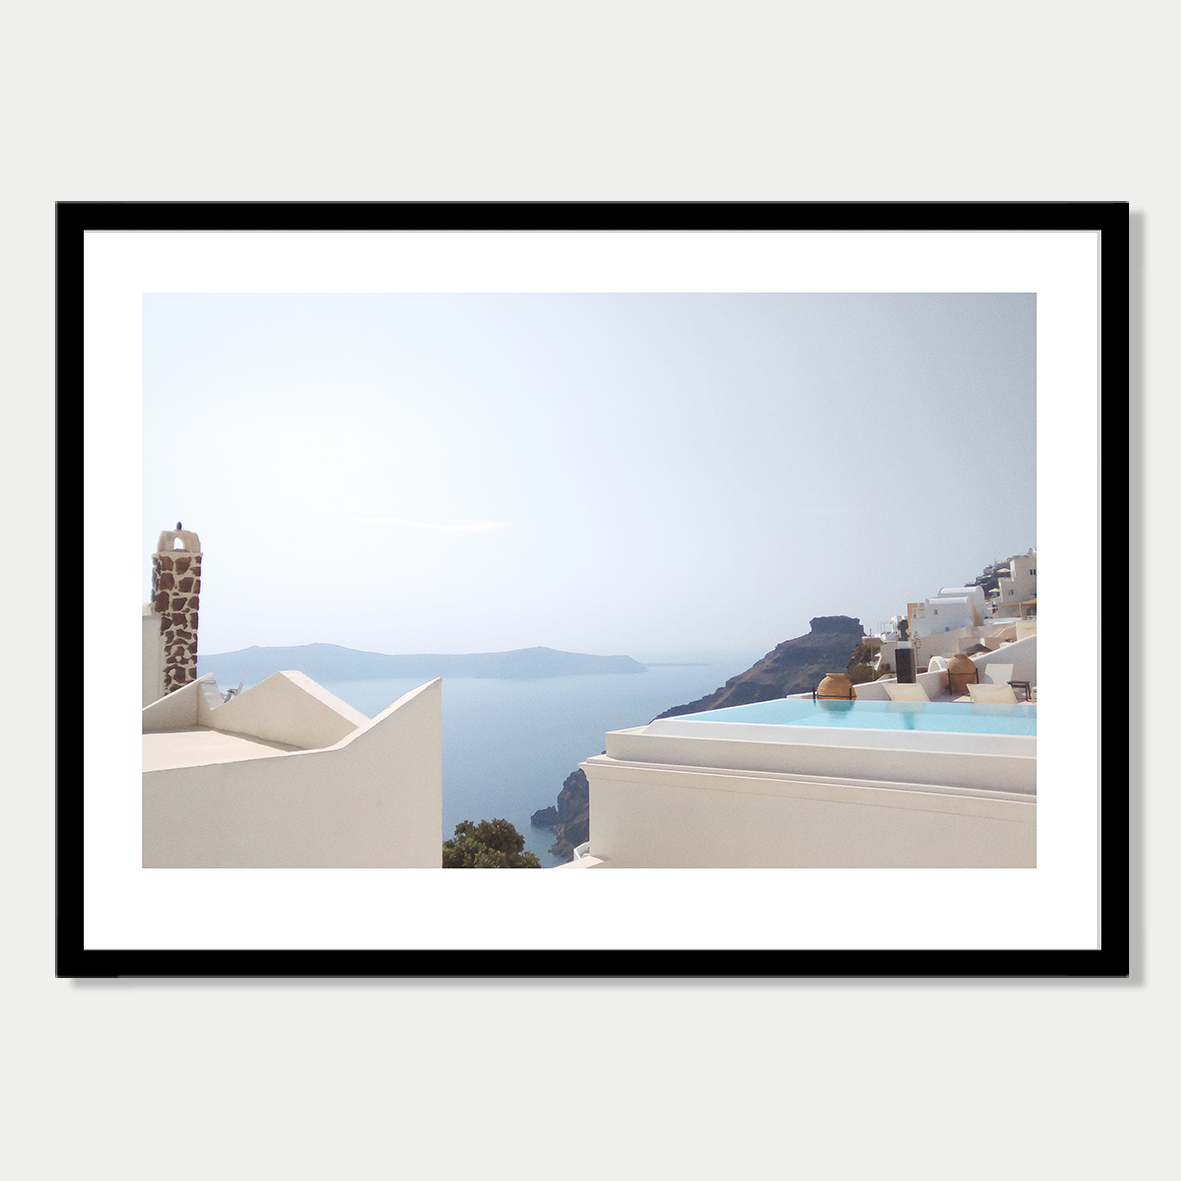 Infinity Pool and Beautiful View - Still Life in Santorini, Greece, Photographic Art Print in a Skinny Black Frame